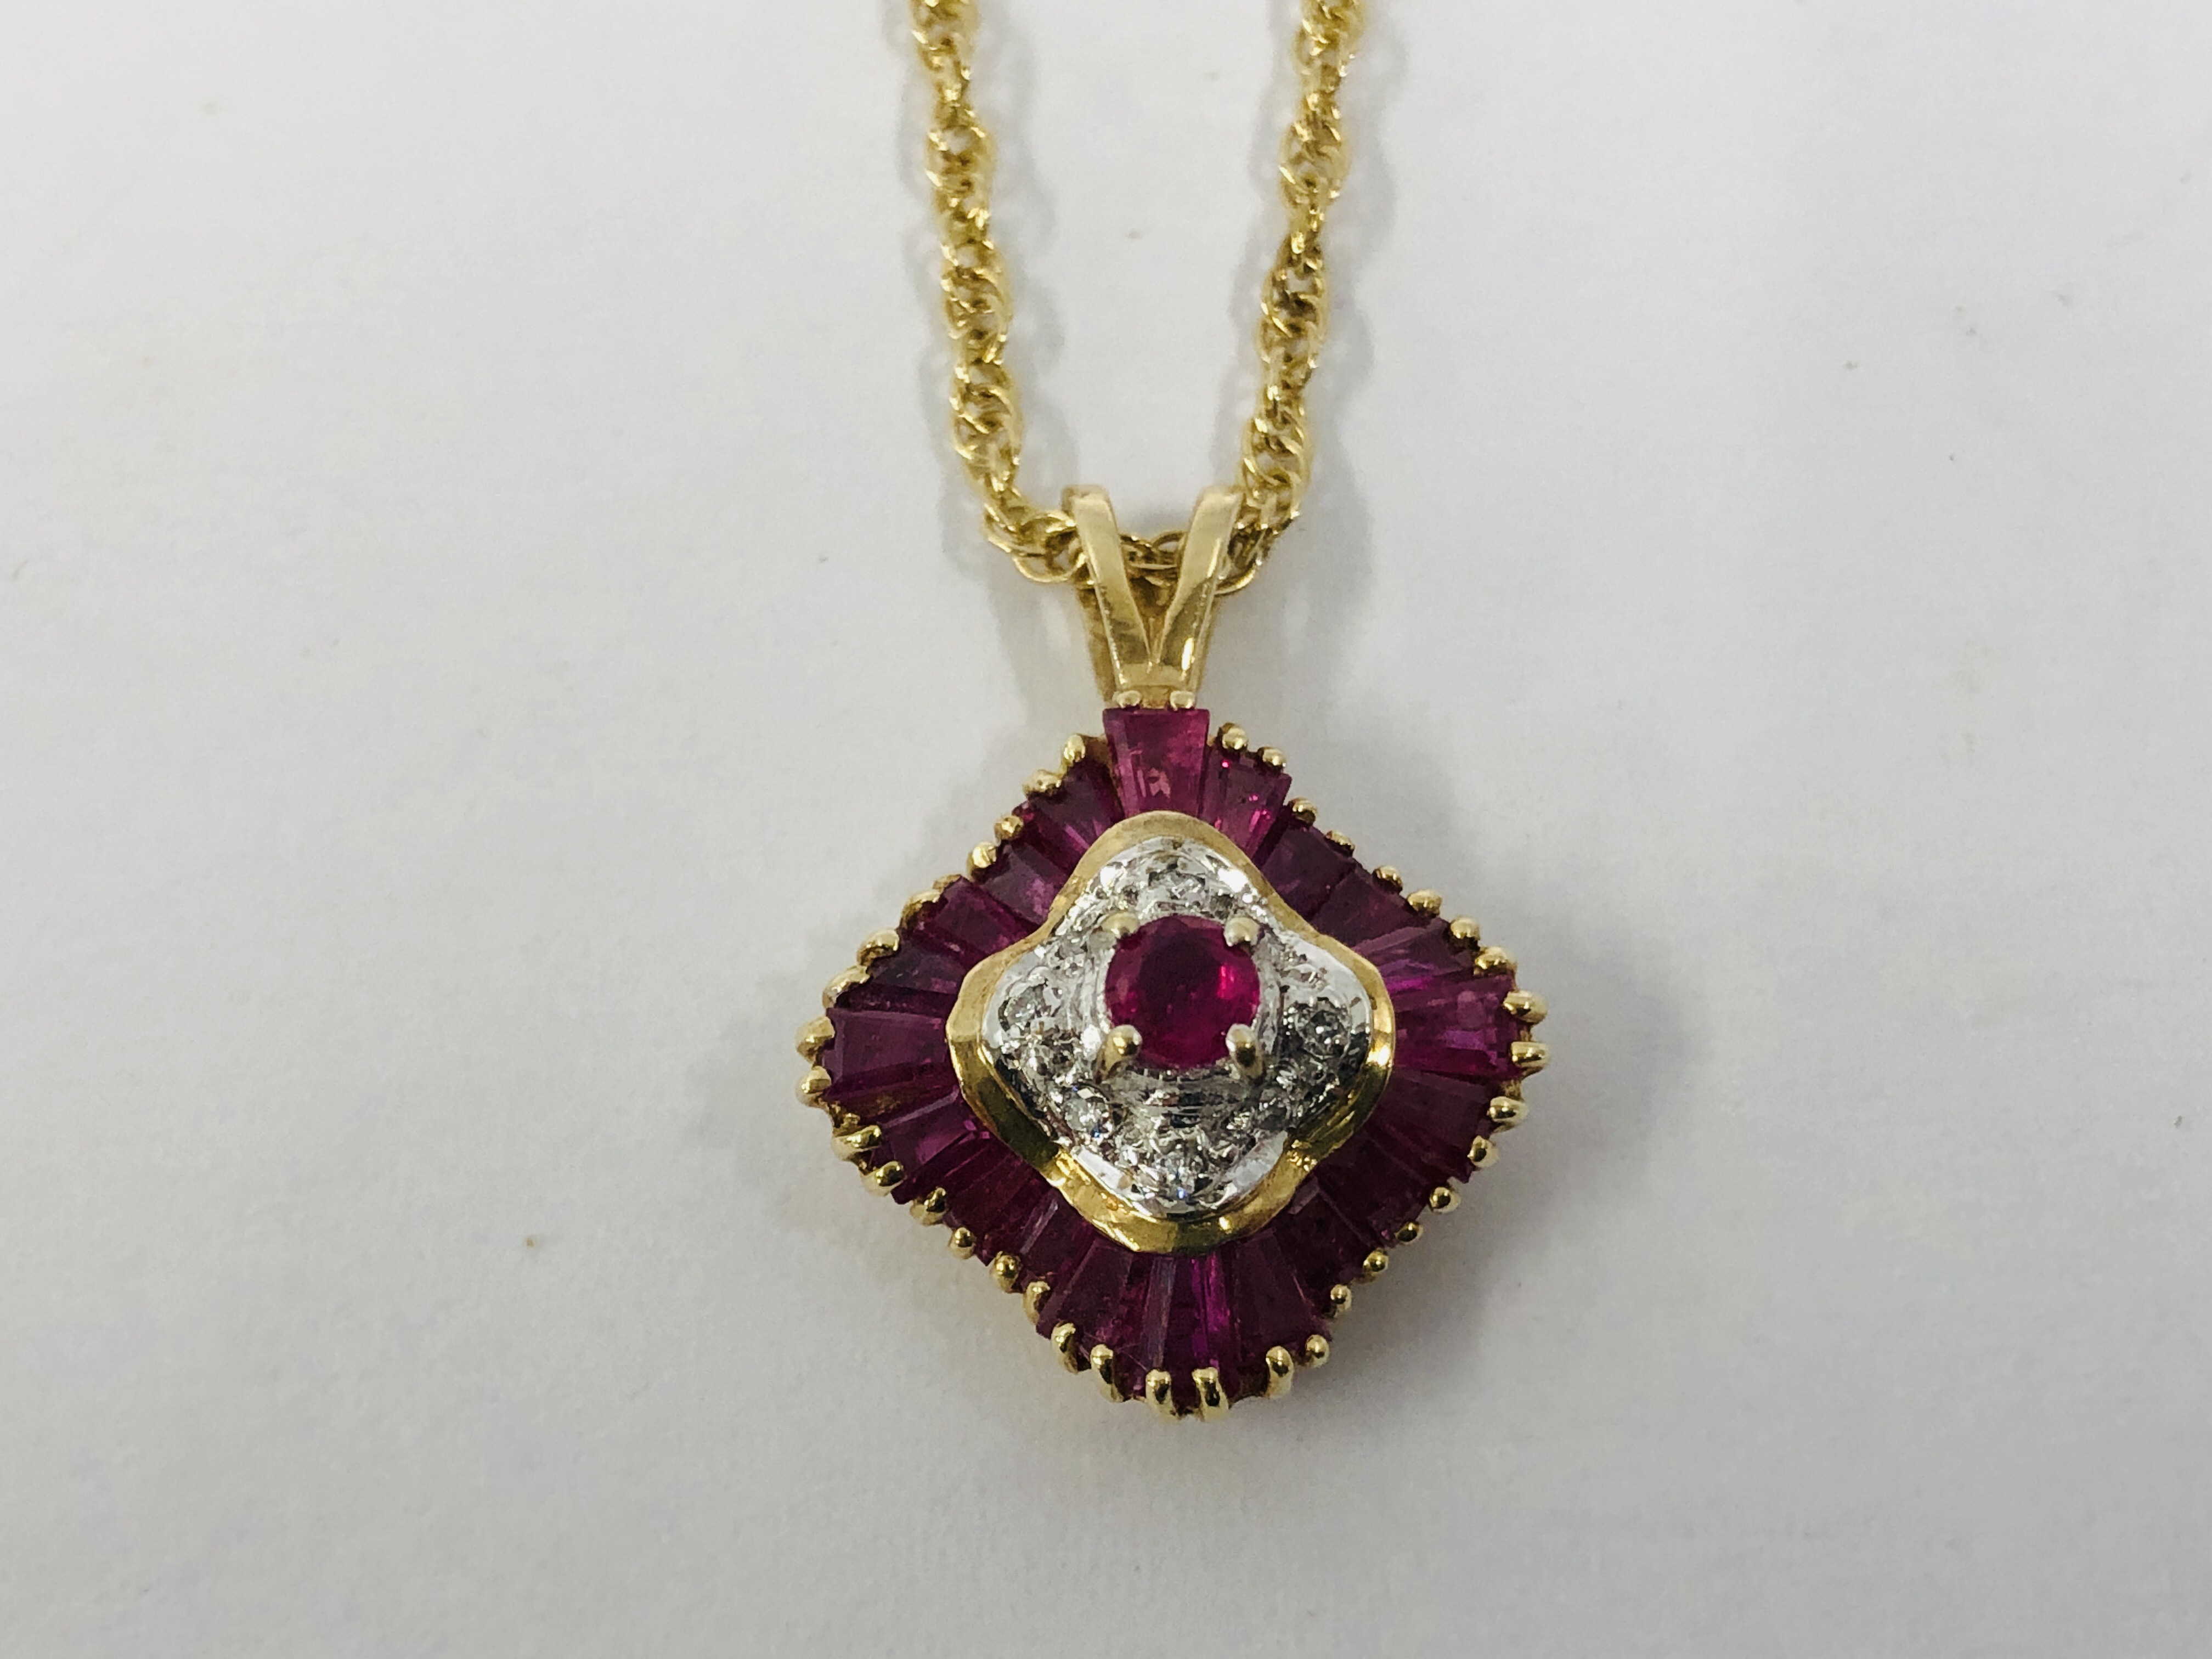 AN ORNATE PENDANT SET WITH MAINLY PINK STONE ON A FINE INTERTWINED 9CT GOLD CHAIN. - Image 5 of 12